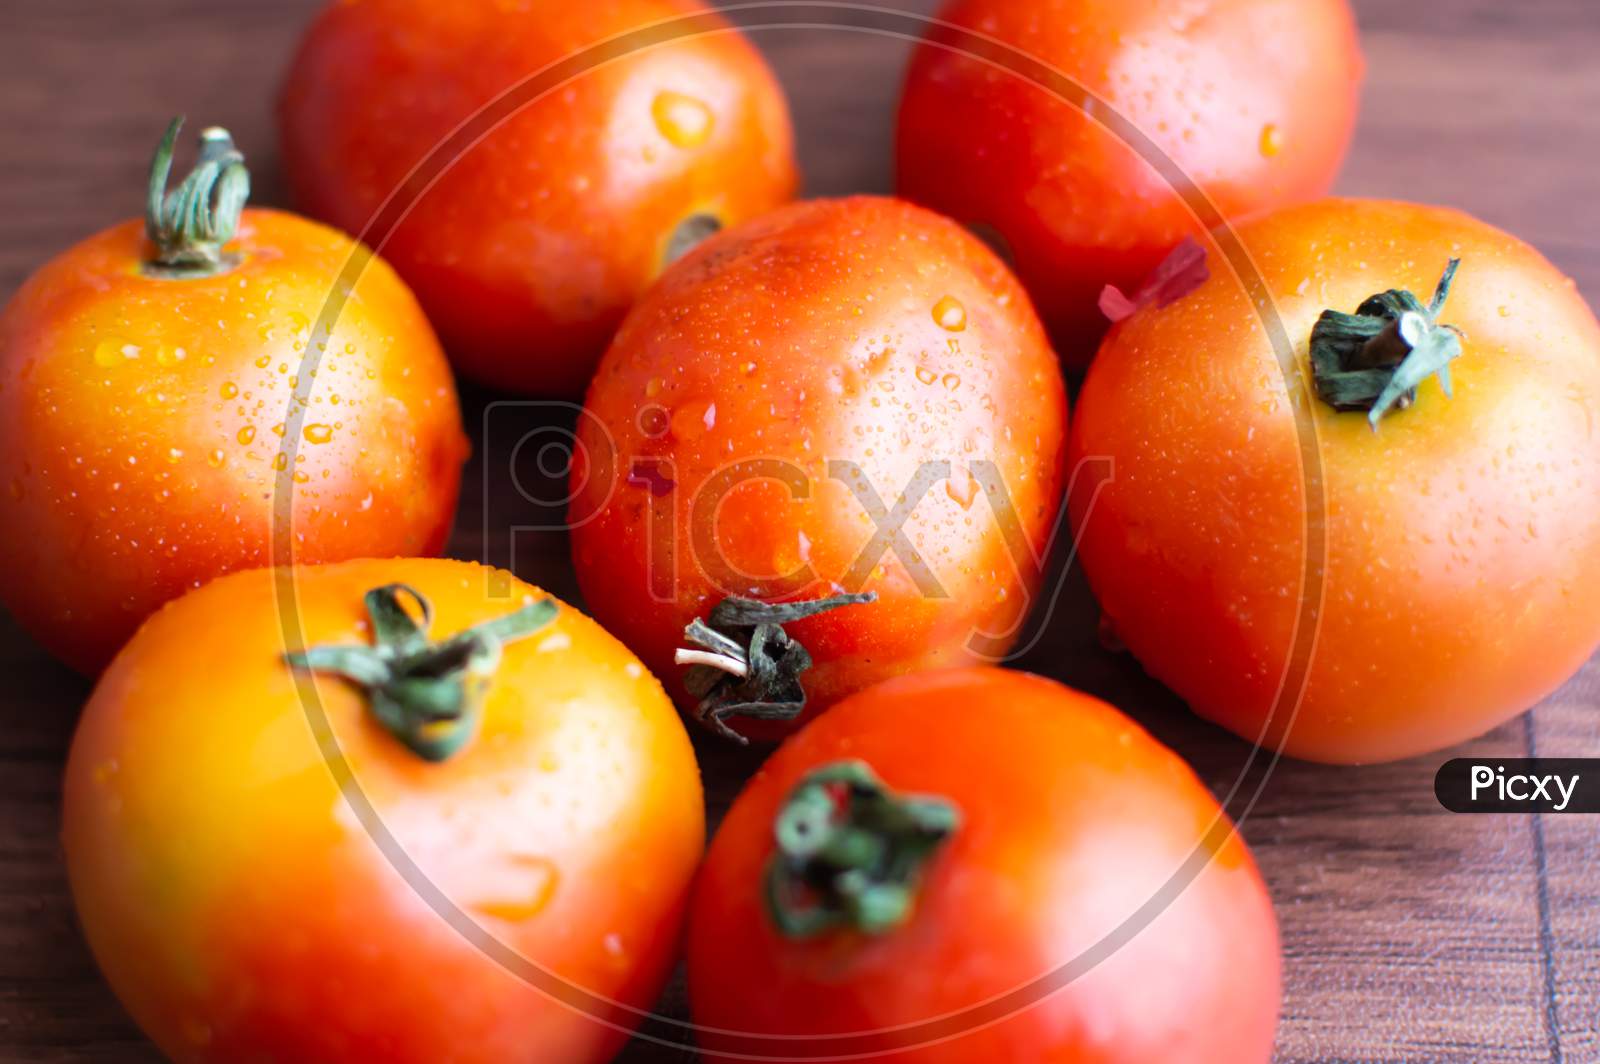 Tomatoes placed together on a wooden floor